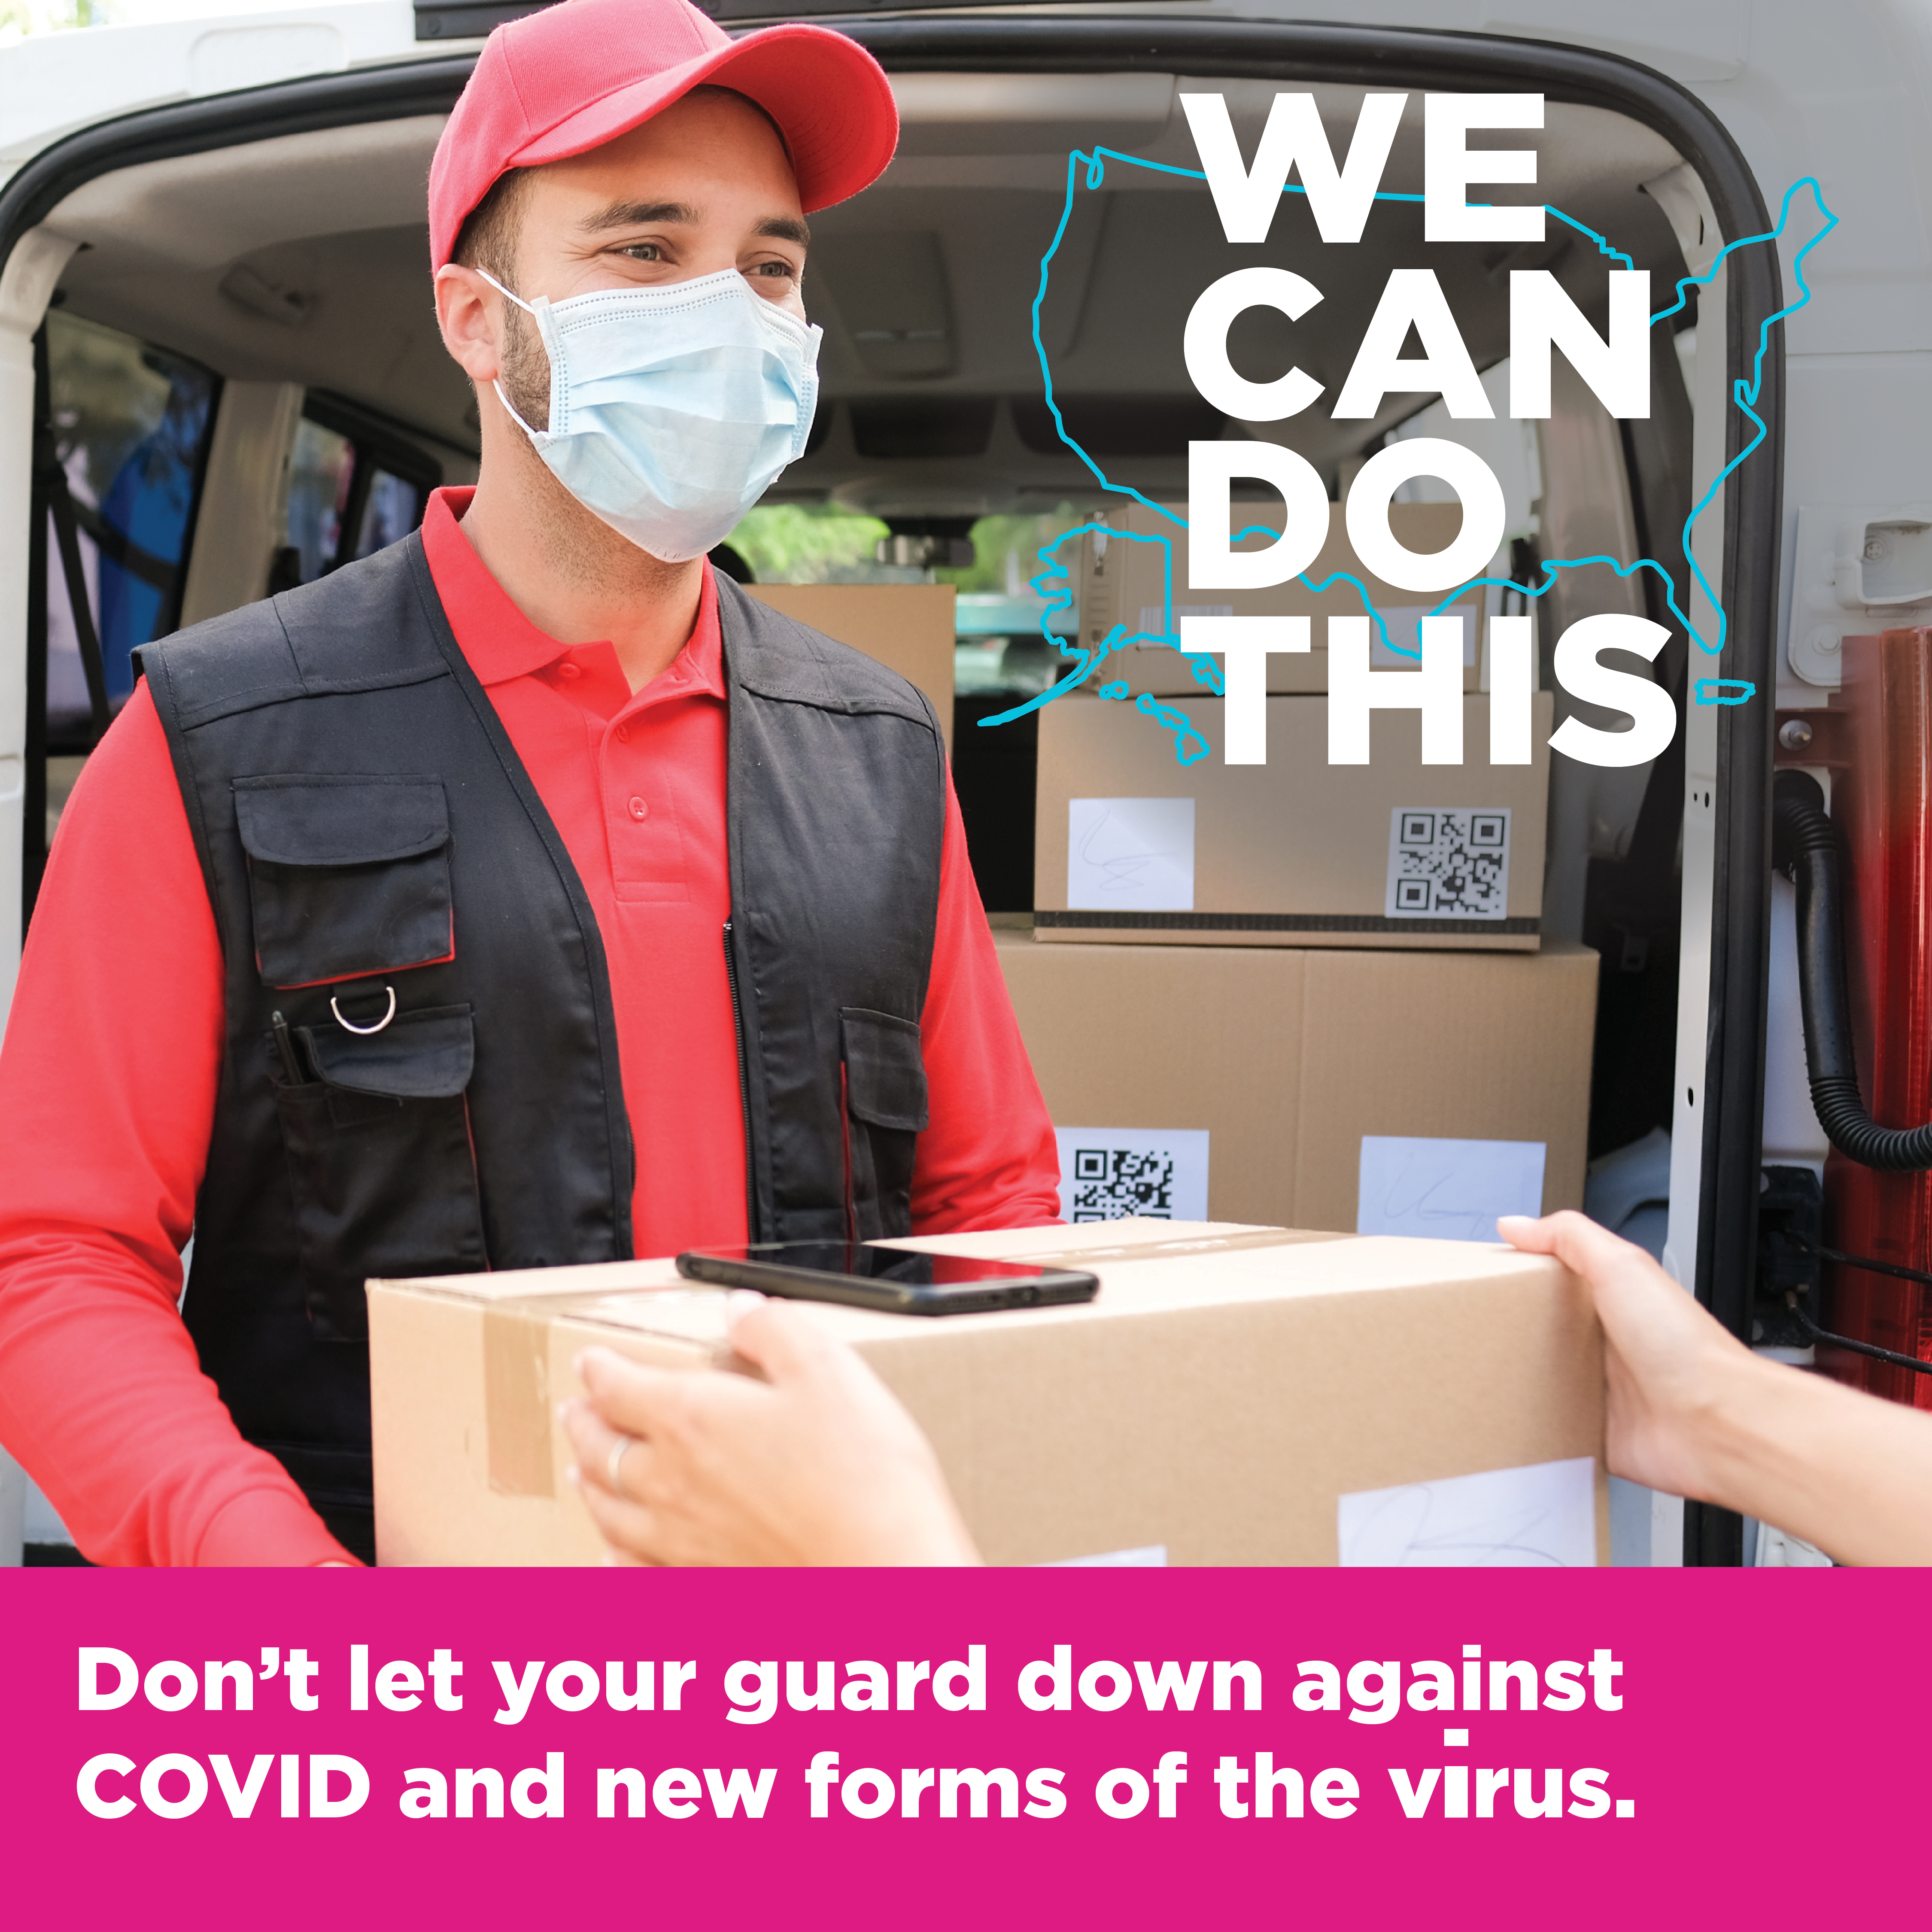 •	Photo of masked delivery person with campaign logo and text: “Don’t let your guard down against COVID and new forms of the virus.”